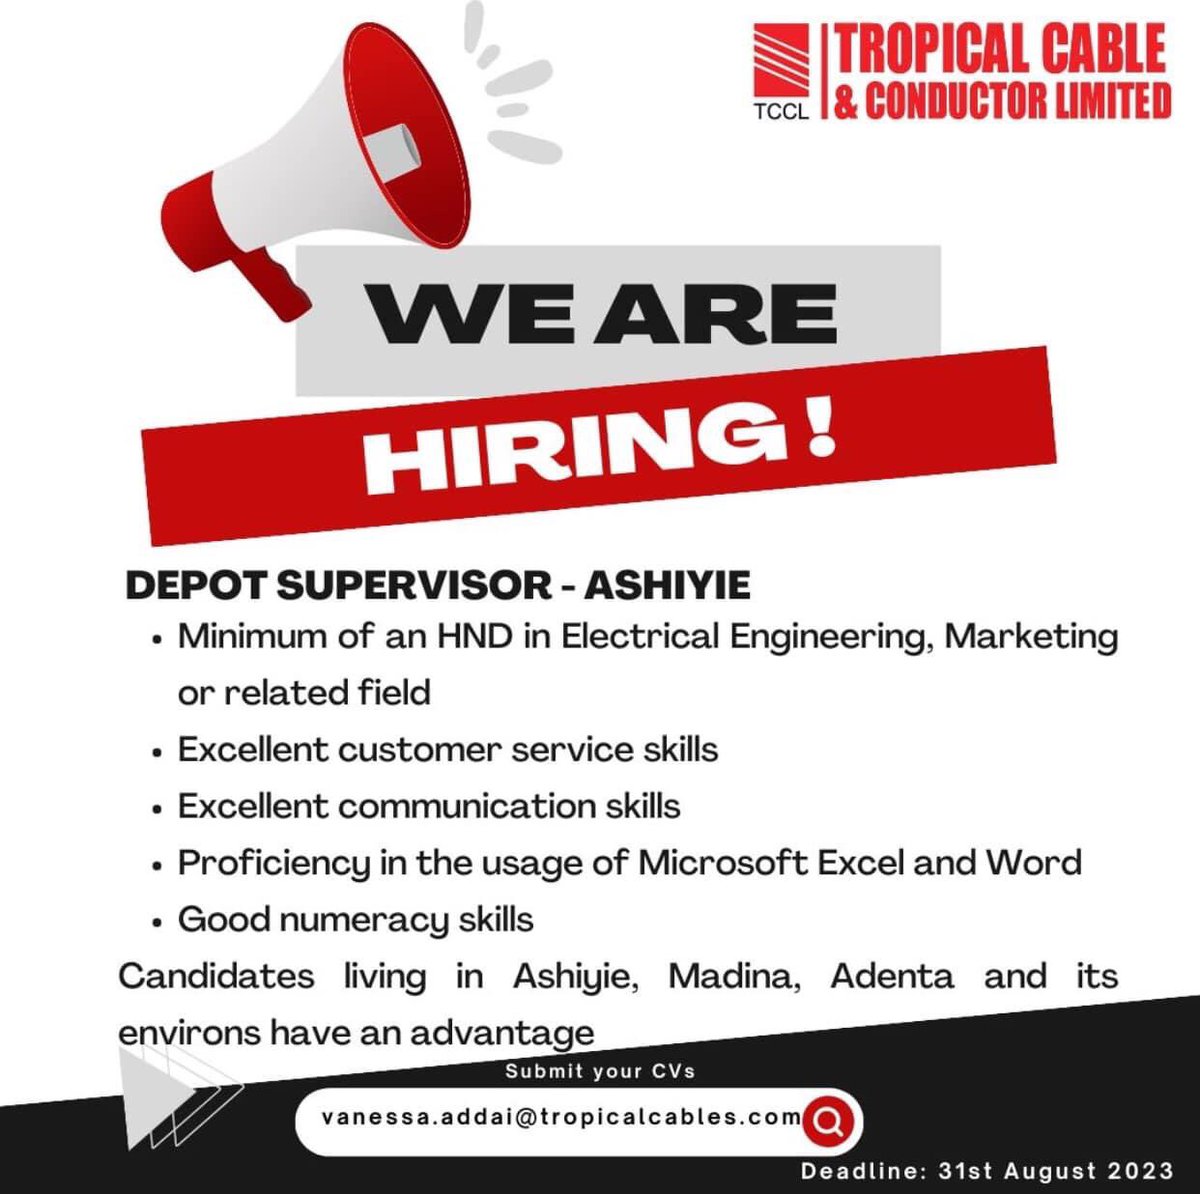 Job Vacancy Announcement!!!!!
Dear All, 
We have vacancy for the role of a Depot Supervisor. Kindly apply if you're interested. Please help me share this post.
#electricalengineeringjobs #engineer #depotsupervisor #depot